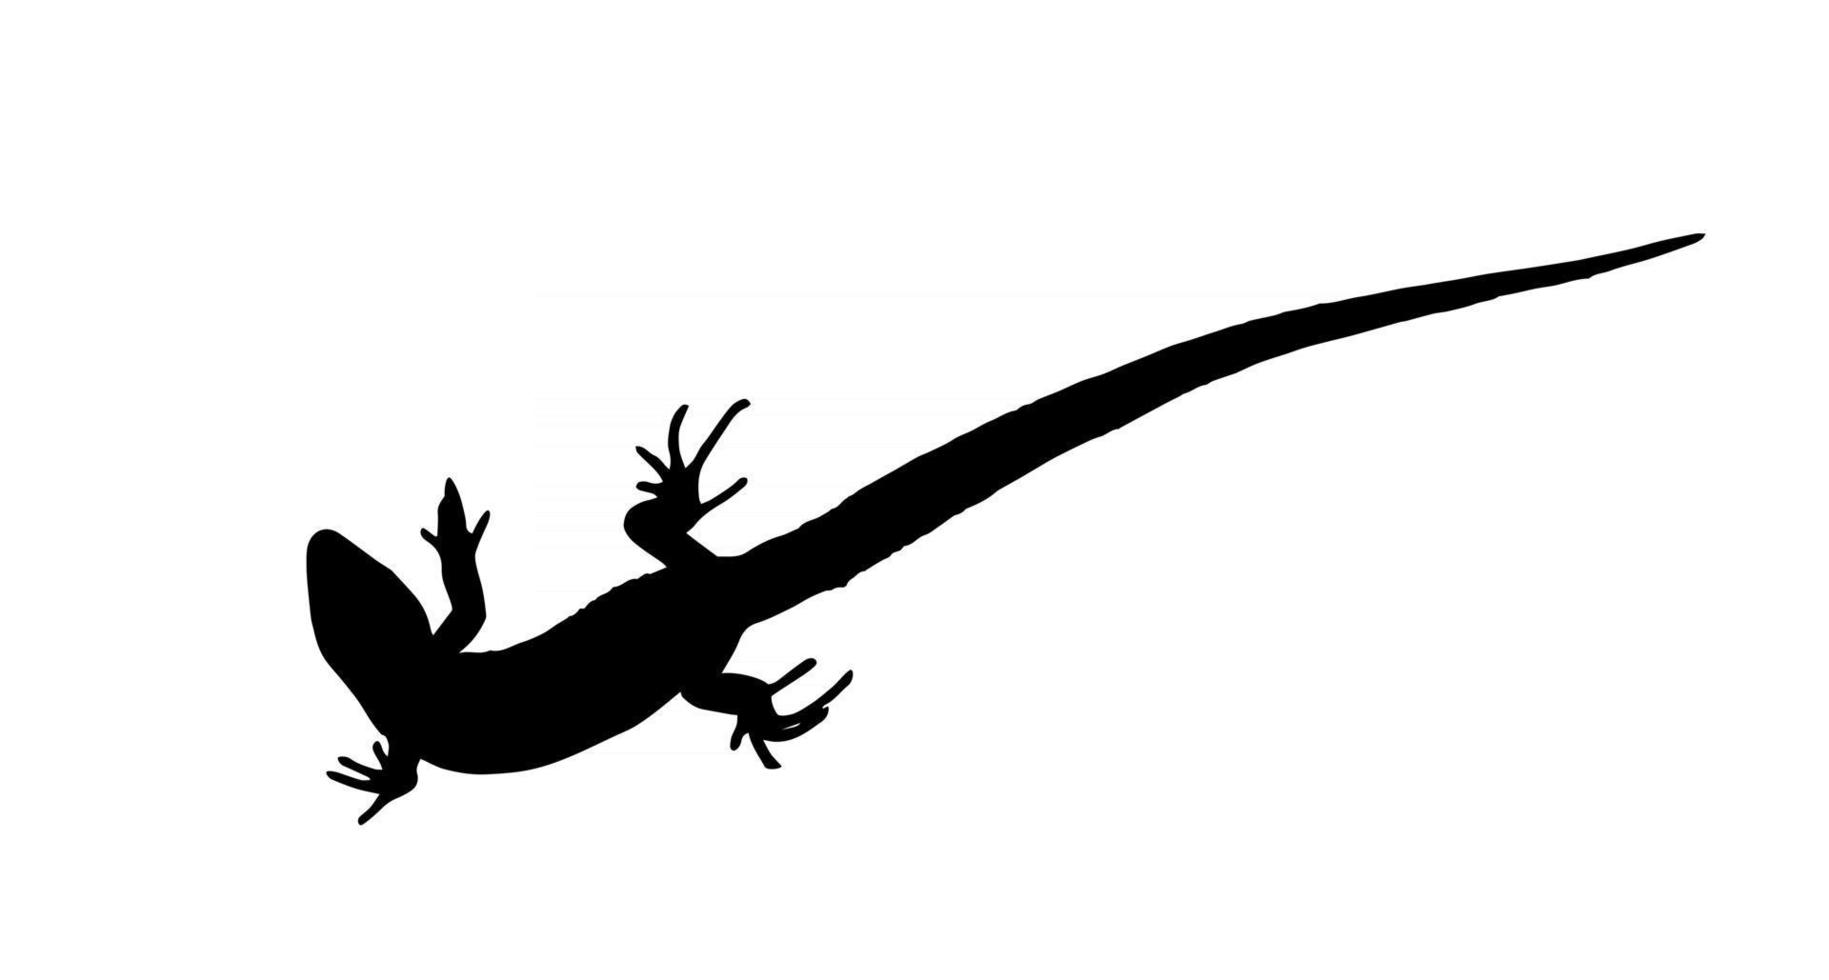 Silhouette of a lizard that creeps. Vector Illustration.